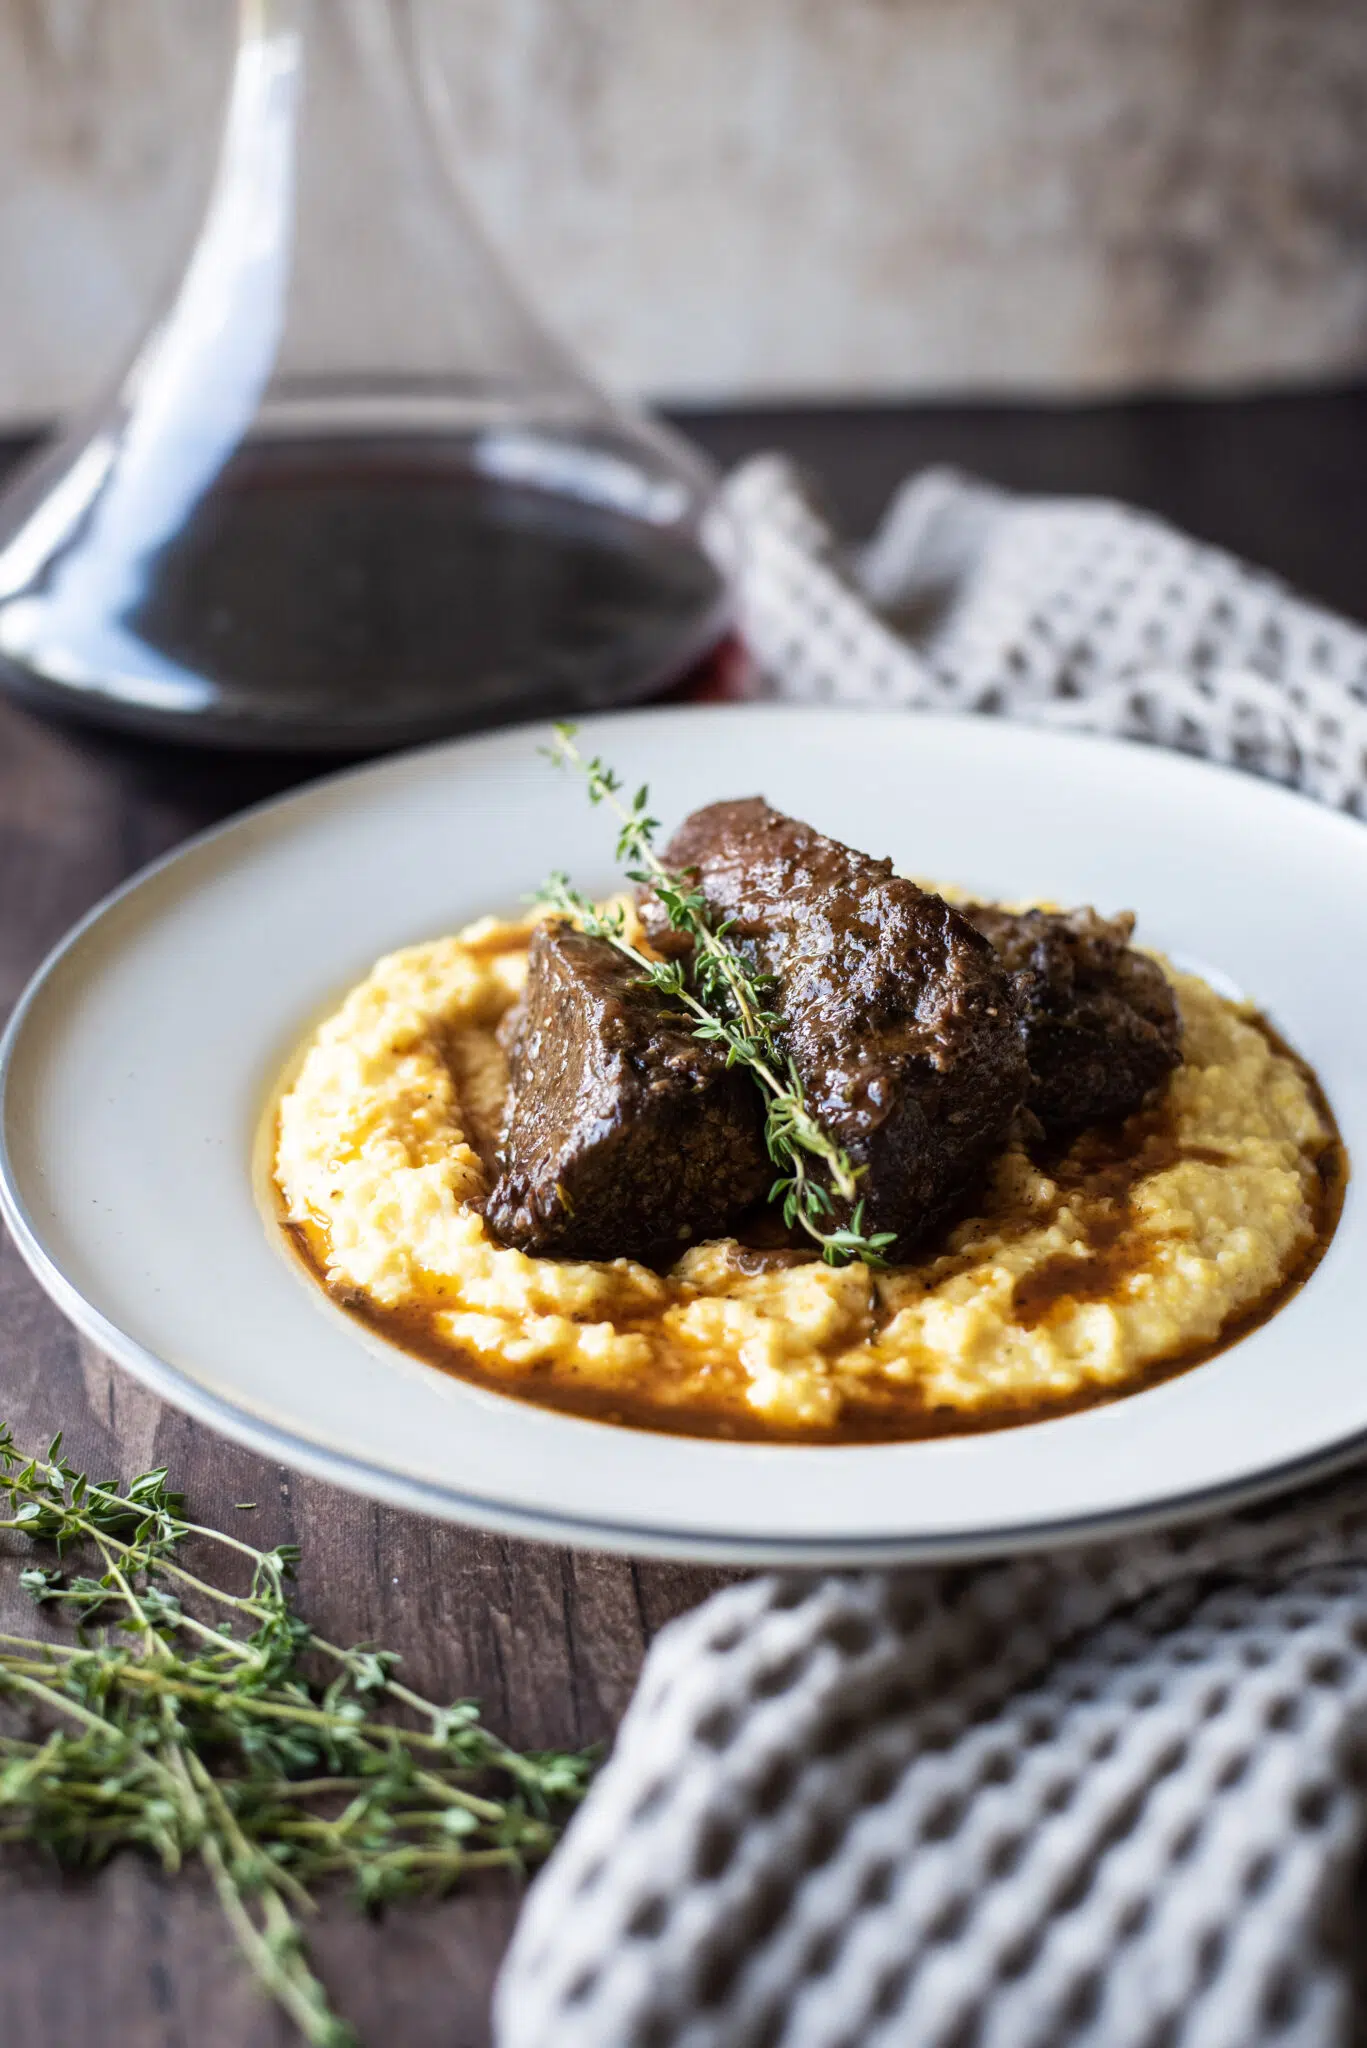 Braised Short Ribs with Cheesy Stone Ground Grits